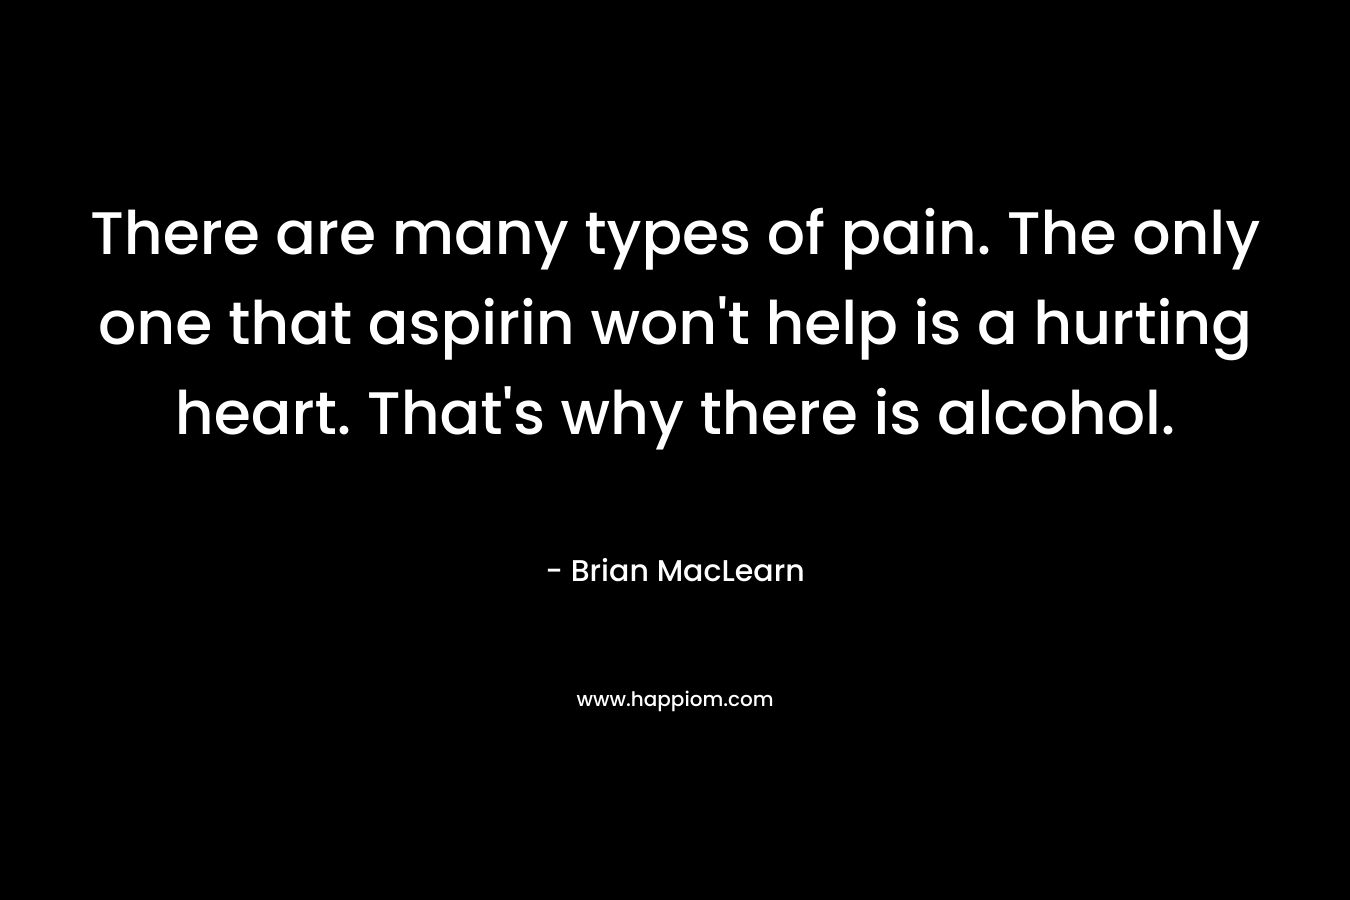 There are many types of pain. The only one that aspirin won’t help is a hurting heart. That’s why there is alcohol. – Brian MacLearn